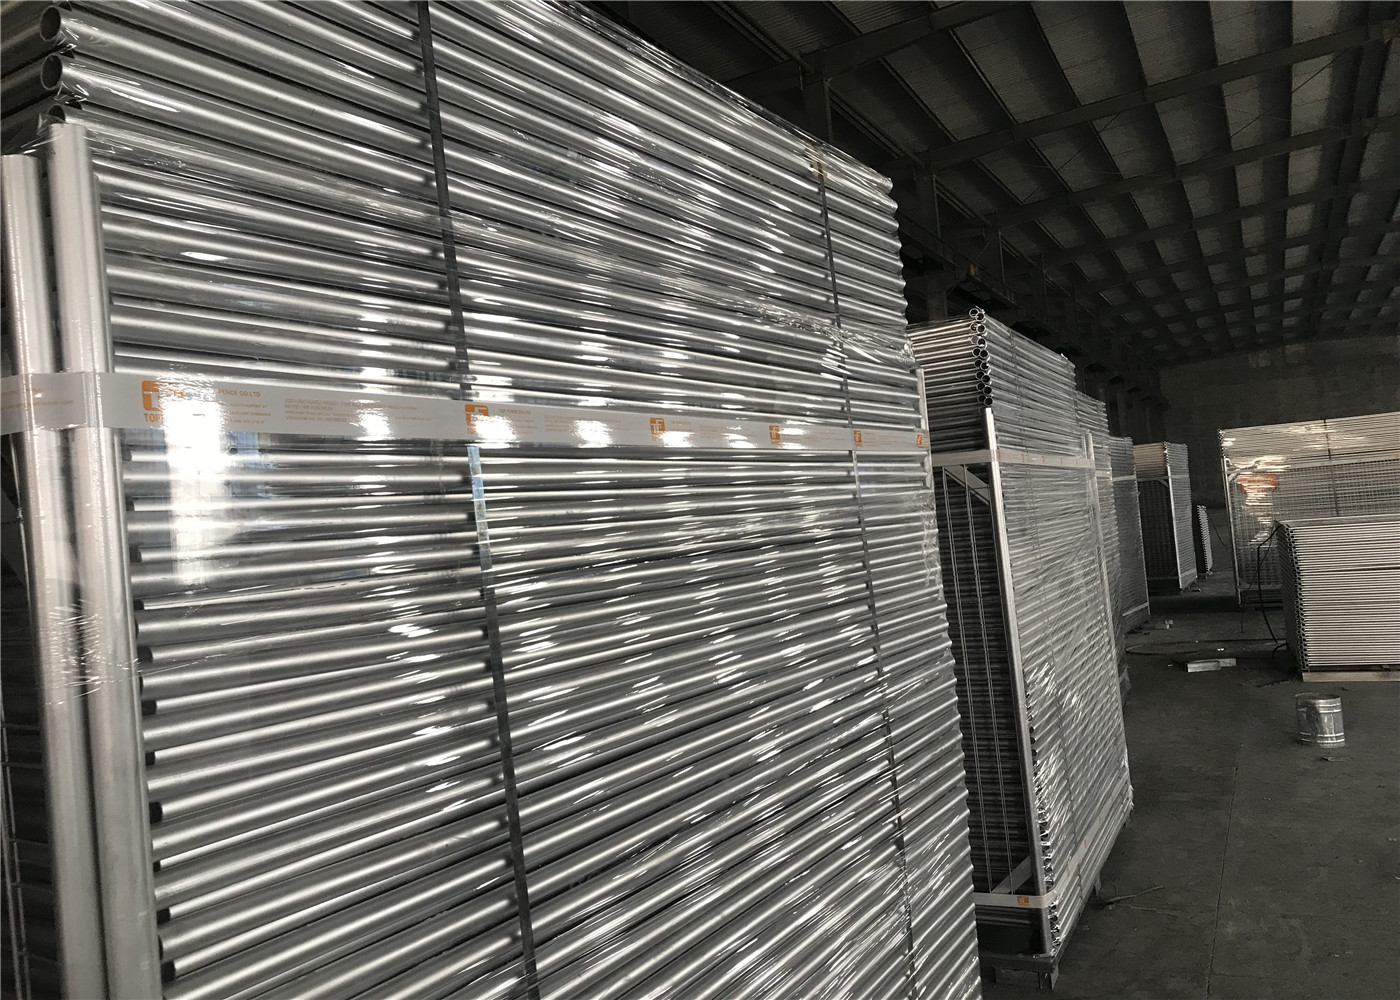  Hot dipped Galvanized Temporary Fence Panels 2.1mx2.4m customized mesh 60mm*150mm Manufactures